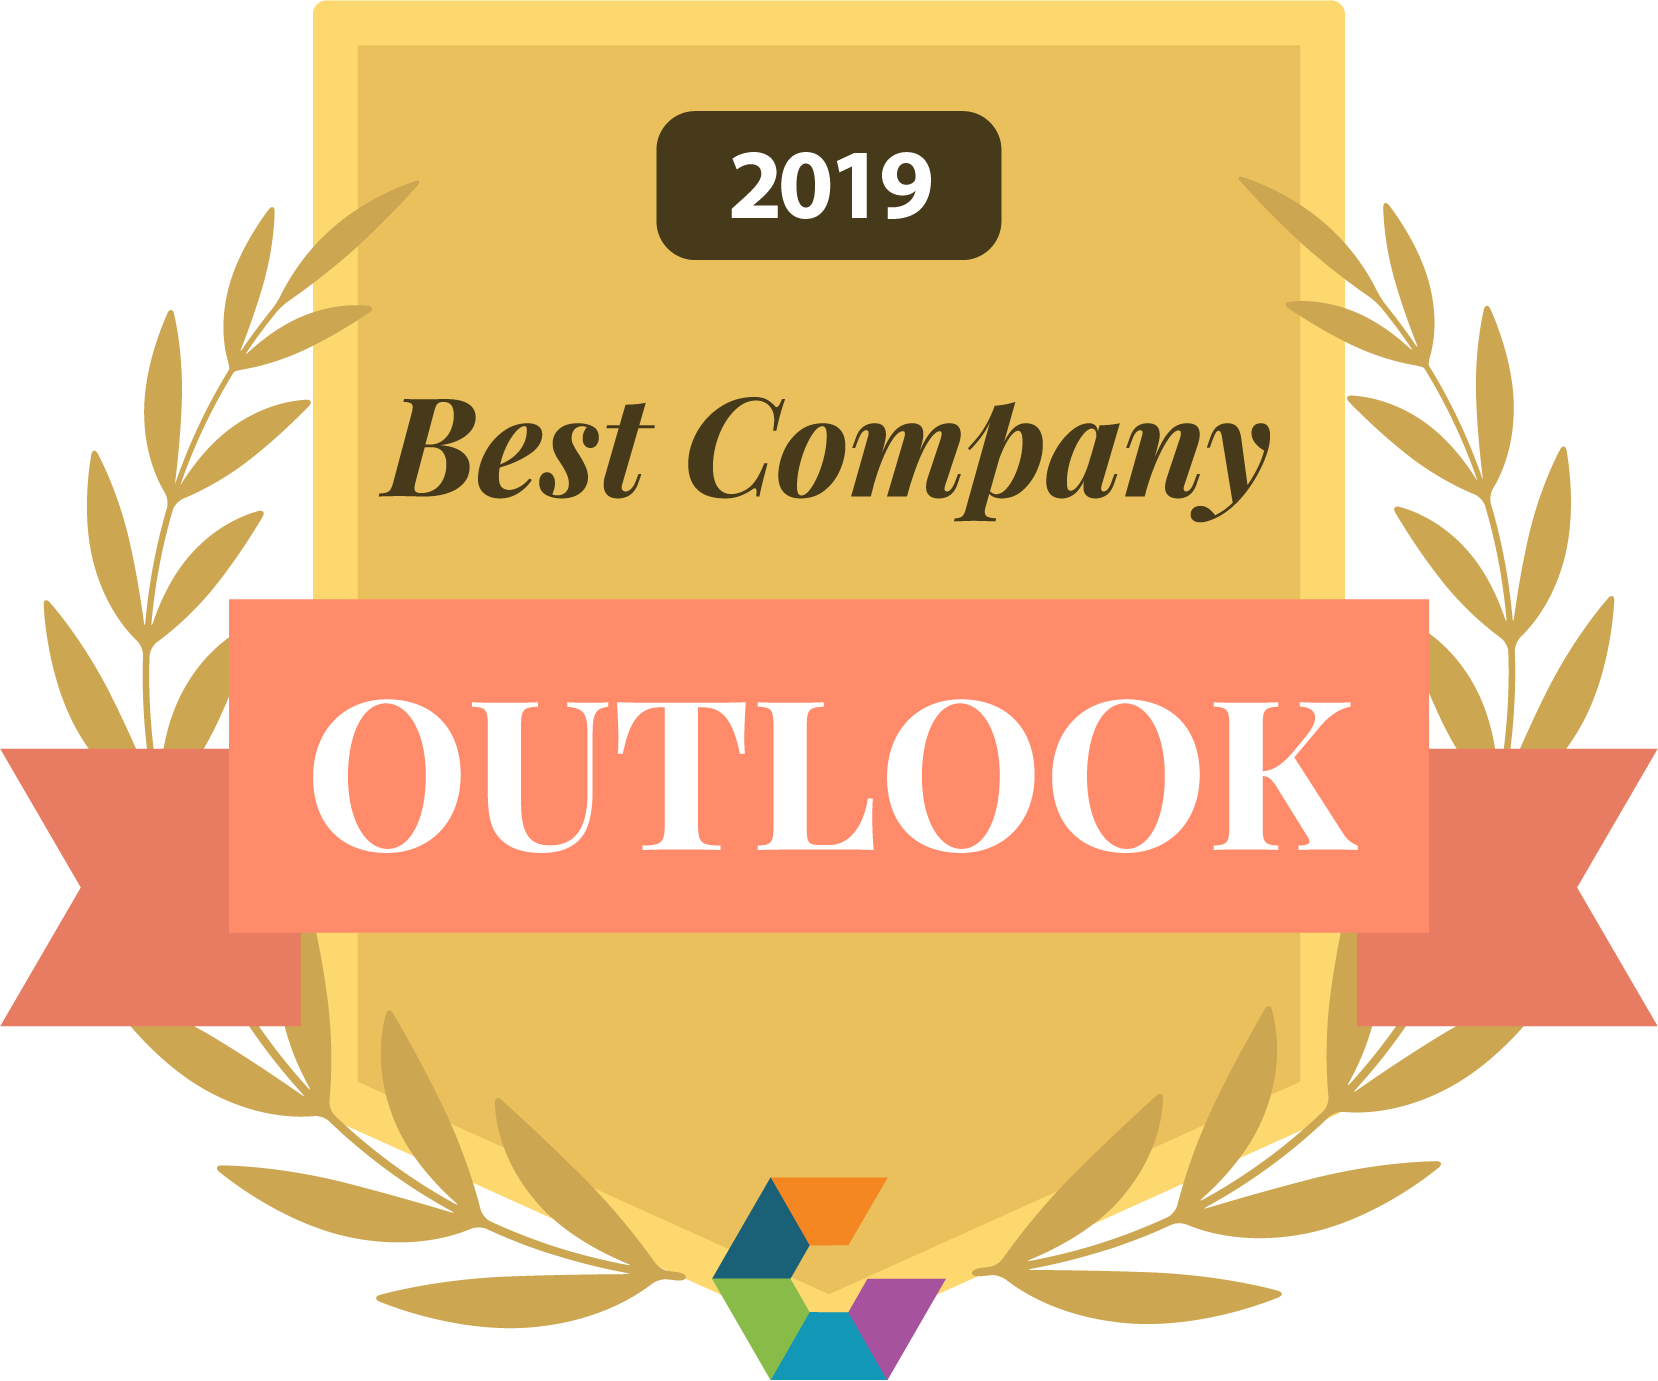 Best Company Outlook – 2019